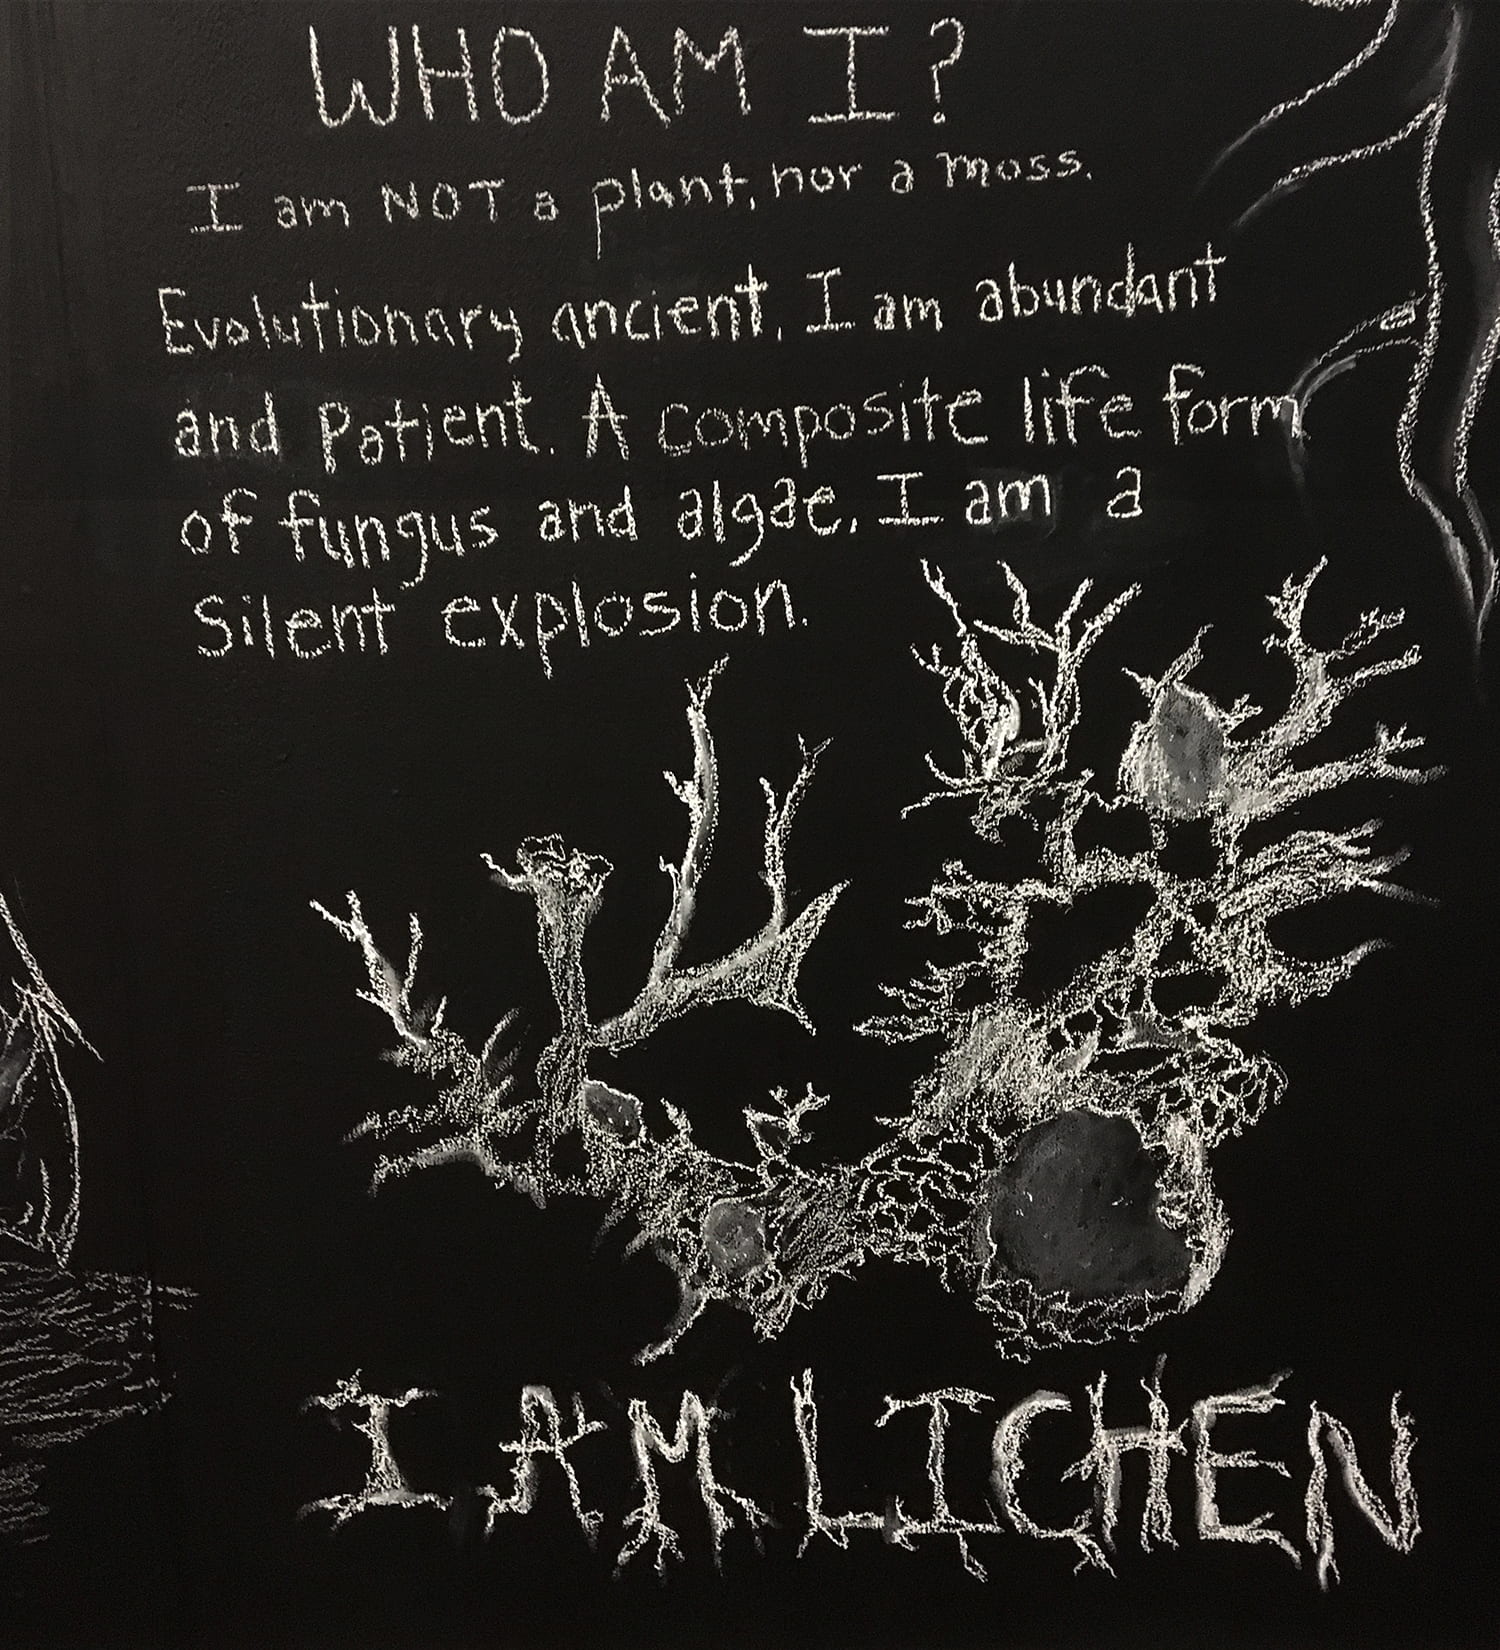 illustration and handwritten words: Who am I? I am not a plant, nor a moss. Evolutionary ancient. I am abundant and patient. A composite life form of fungus and algae, I am a silent explosion. I am lichen.